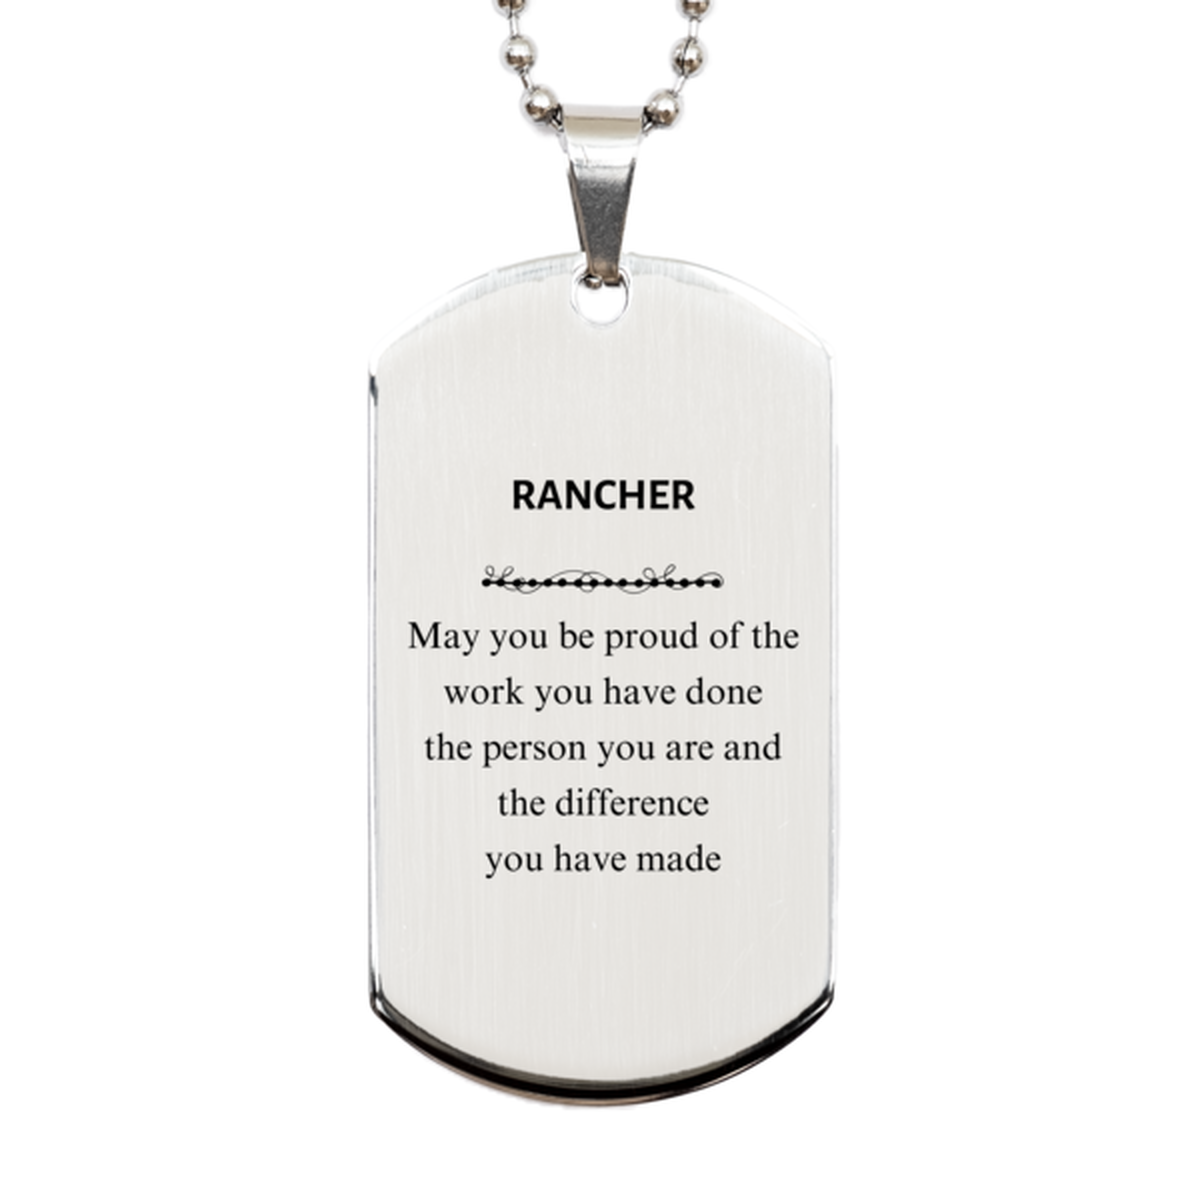 Rancher May you be proud of the work you have done, Retirement Rancher Silver Dog Tag for Colleague Appreciation Gifts Amazing for Rancher